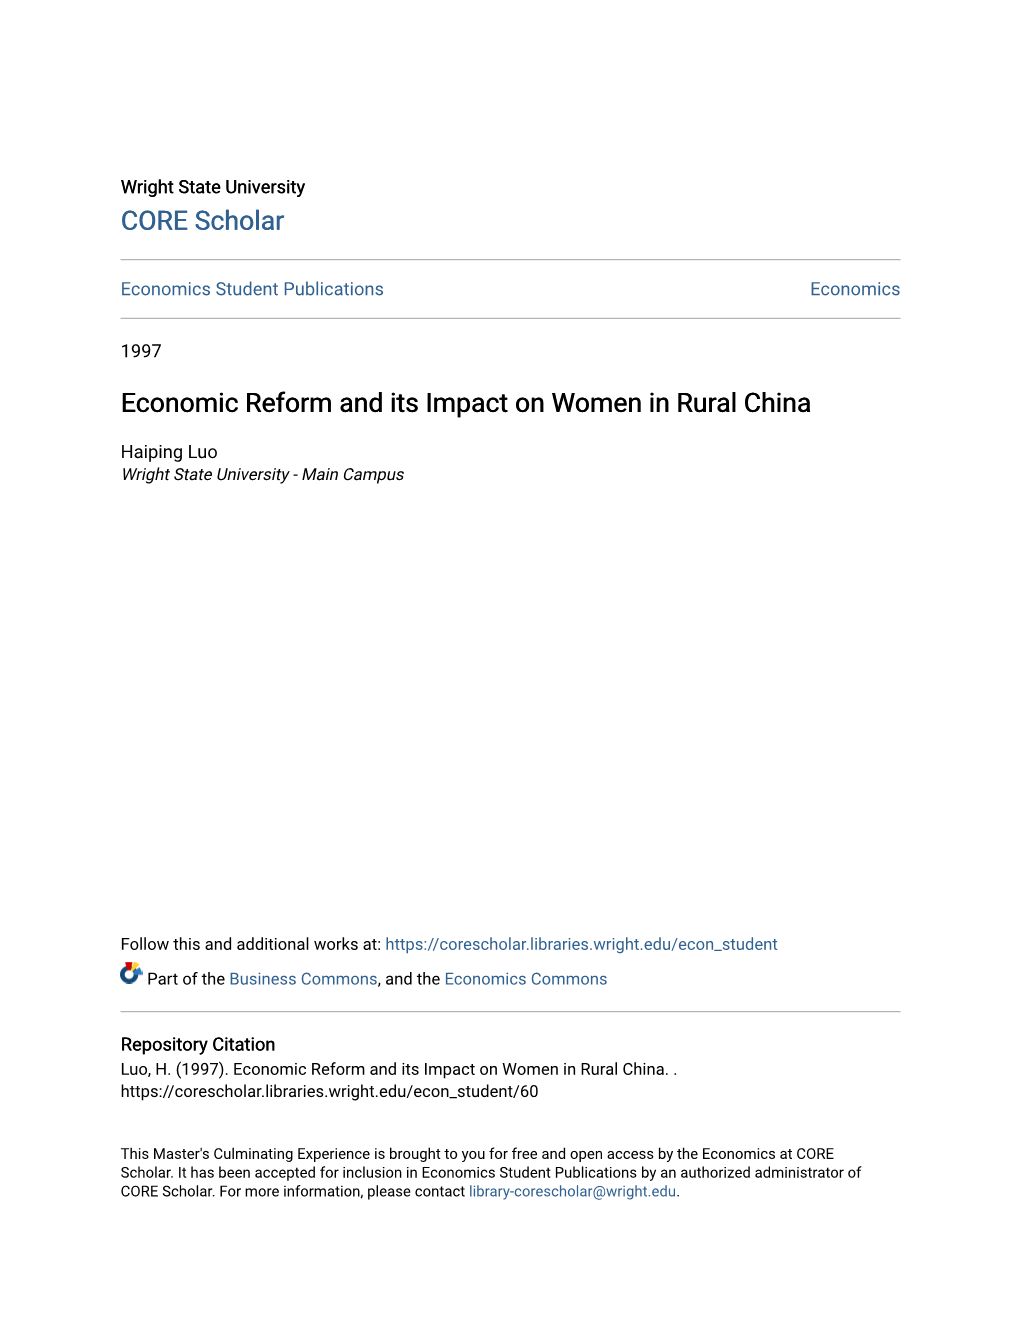 Economic Reform and Its Impact on Women in Rural China